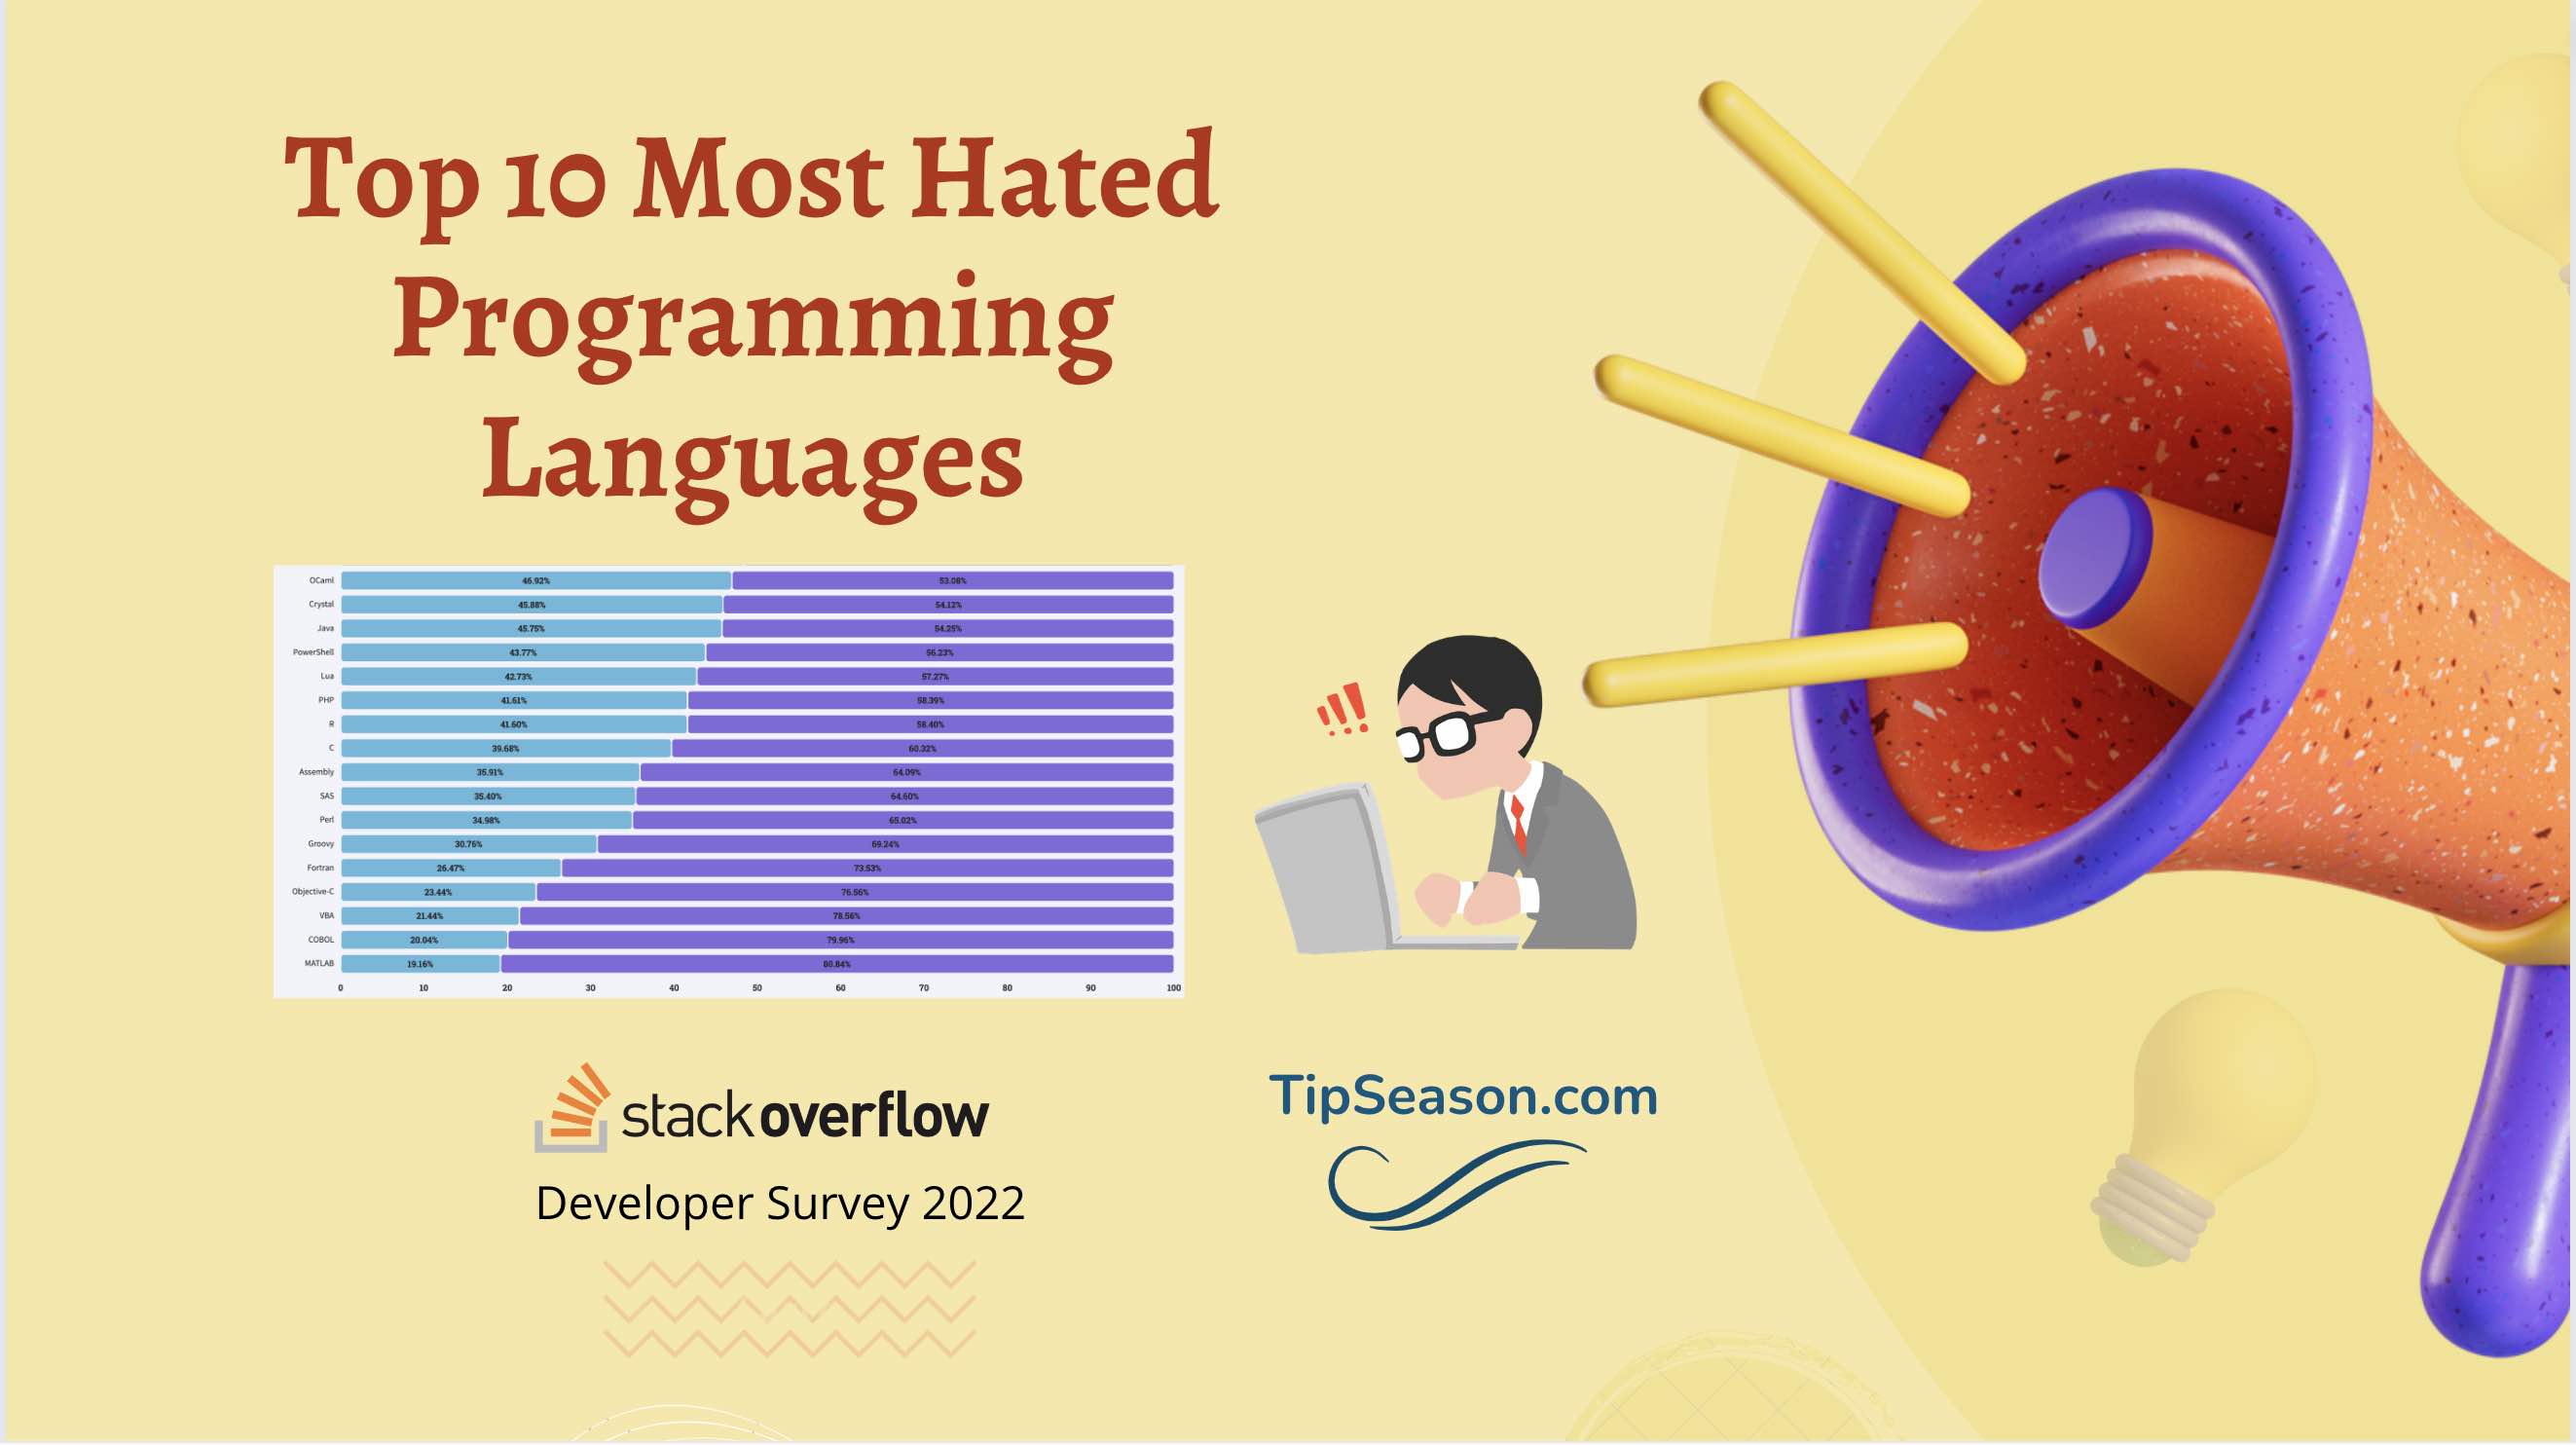 Top 10 most hated programming languages of 2022 and their use